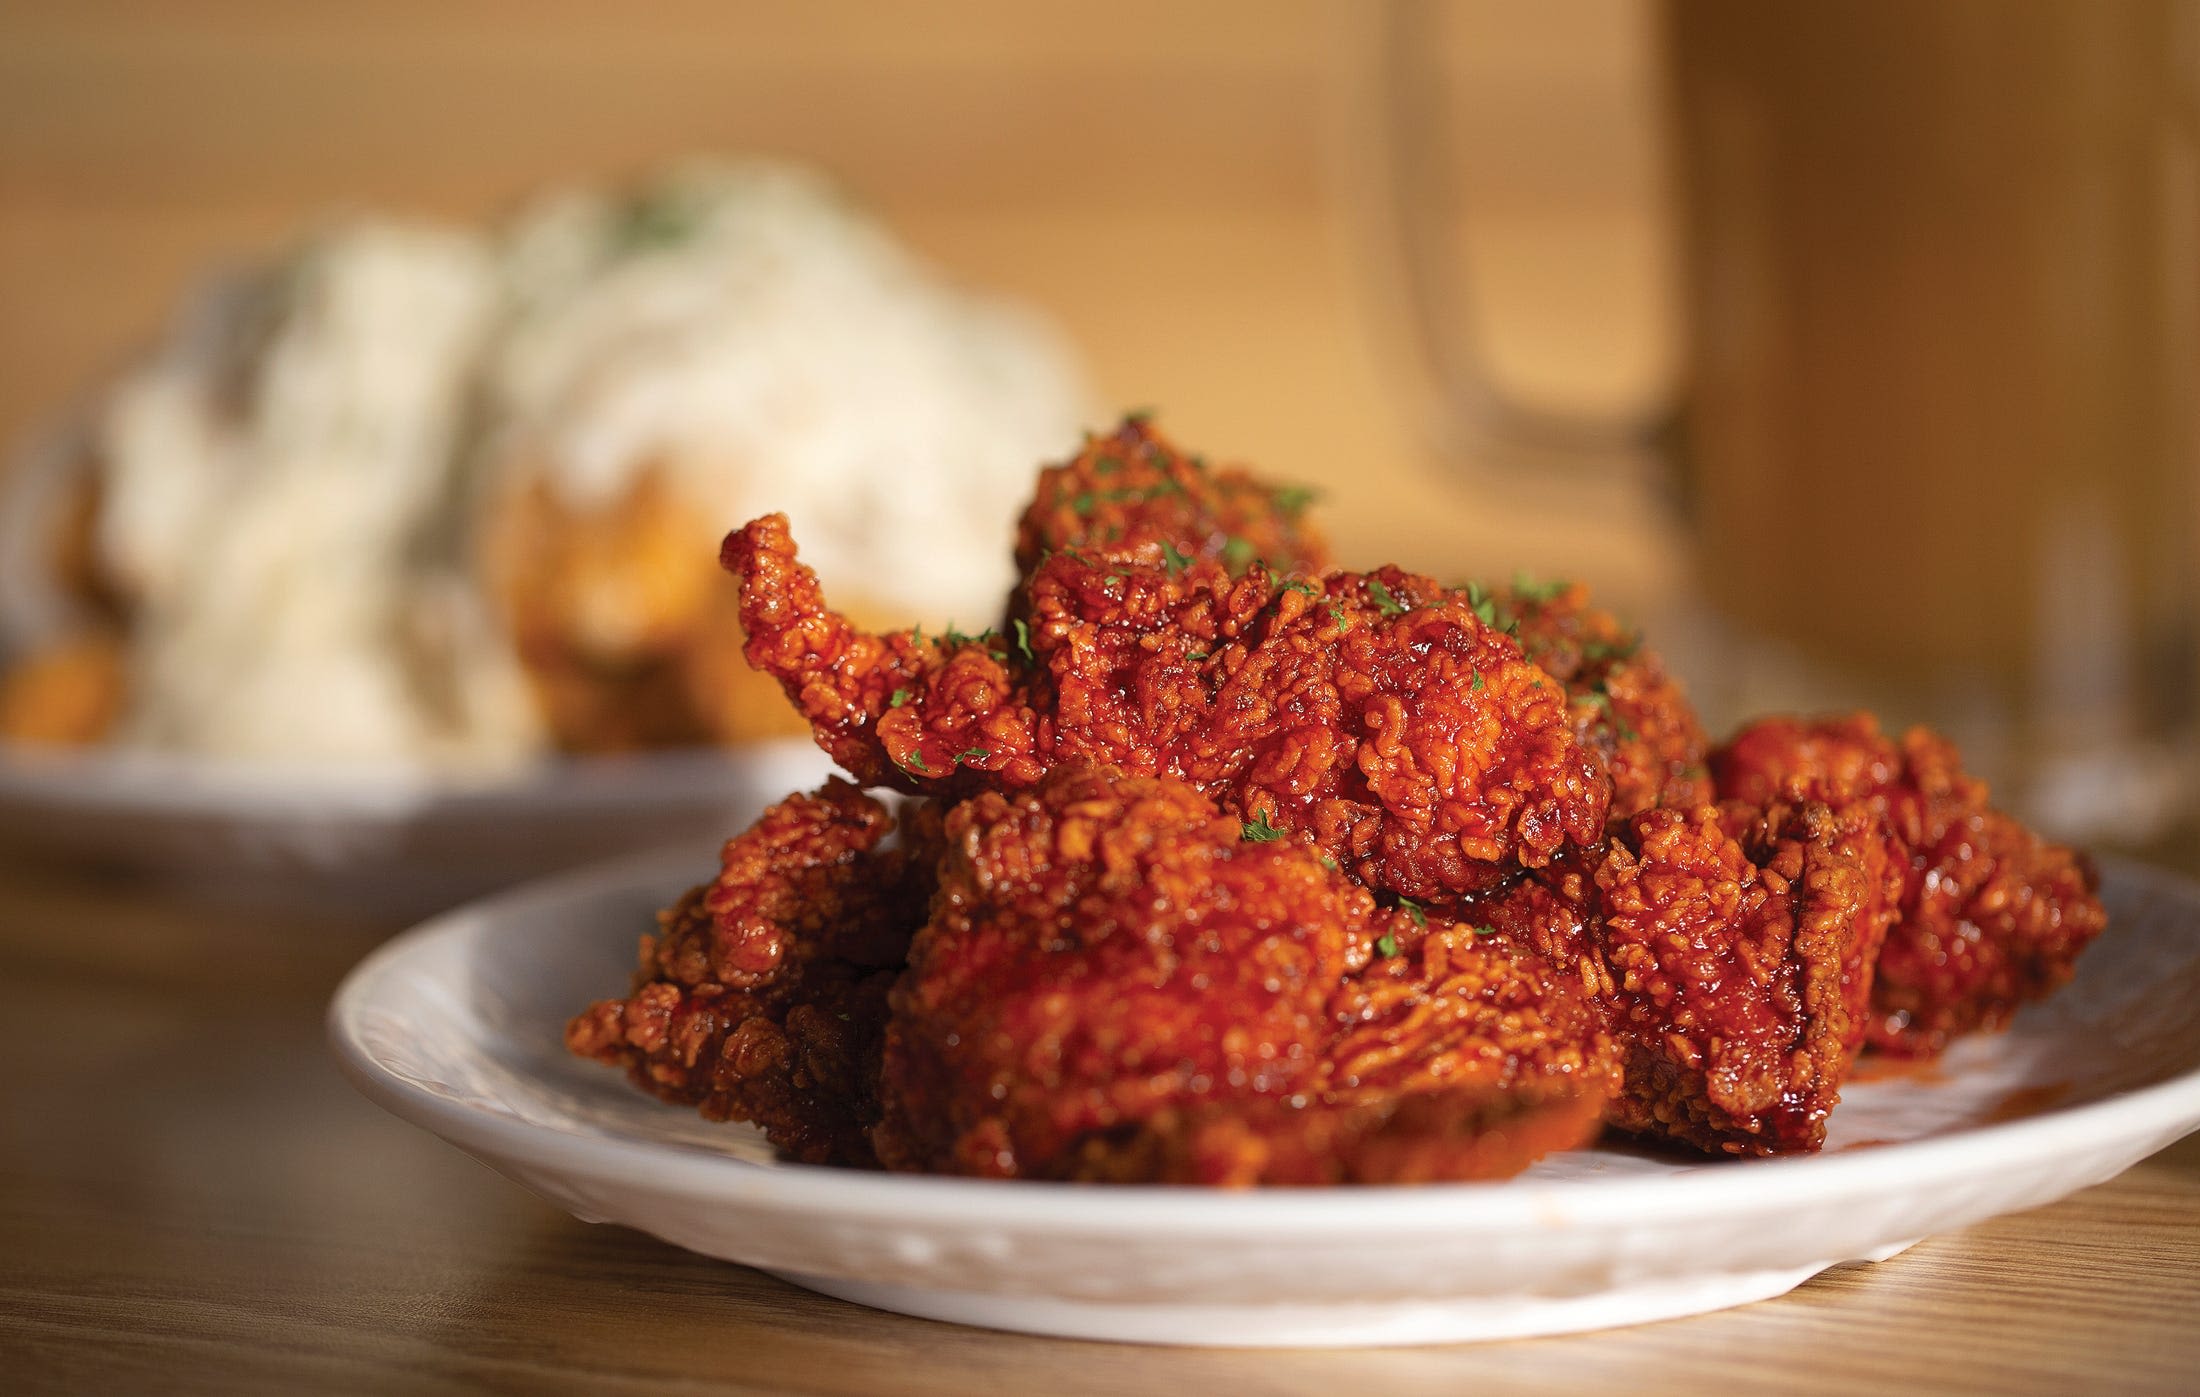 Ohio's best fried chicken place is right here in Cincinnati, according to Yelp